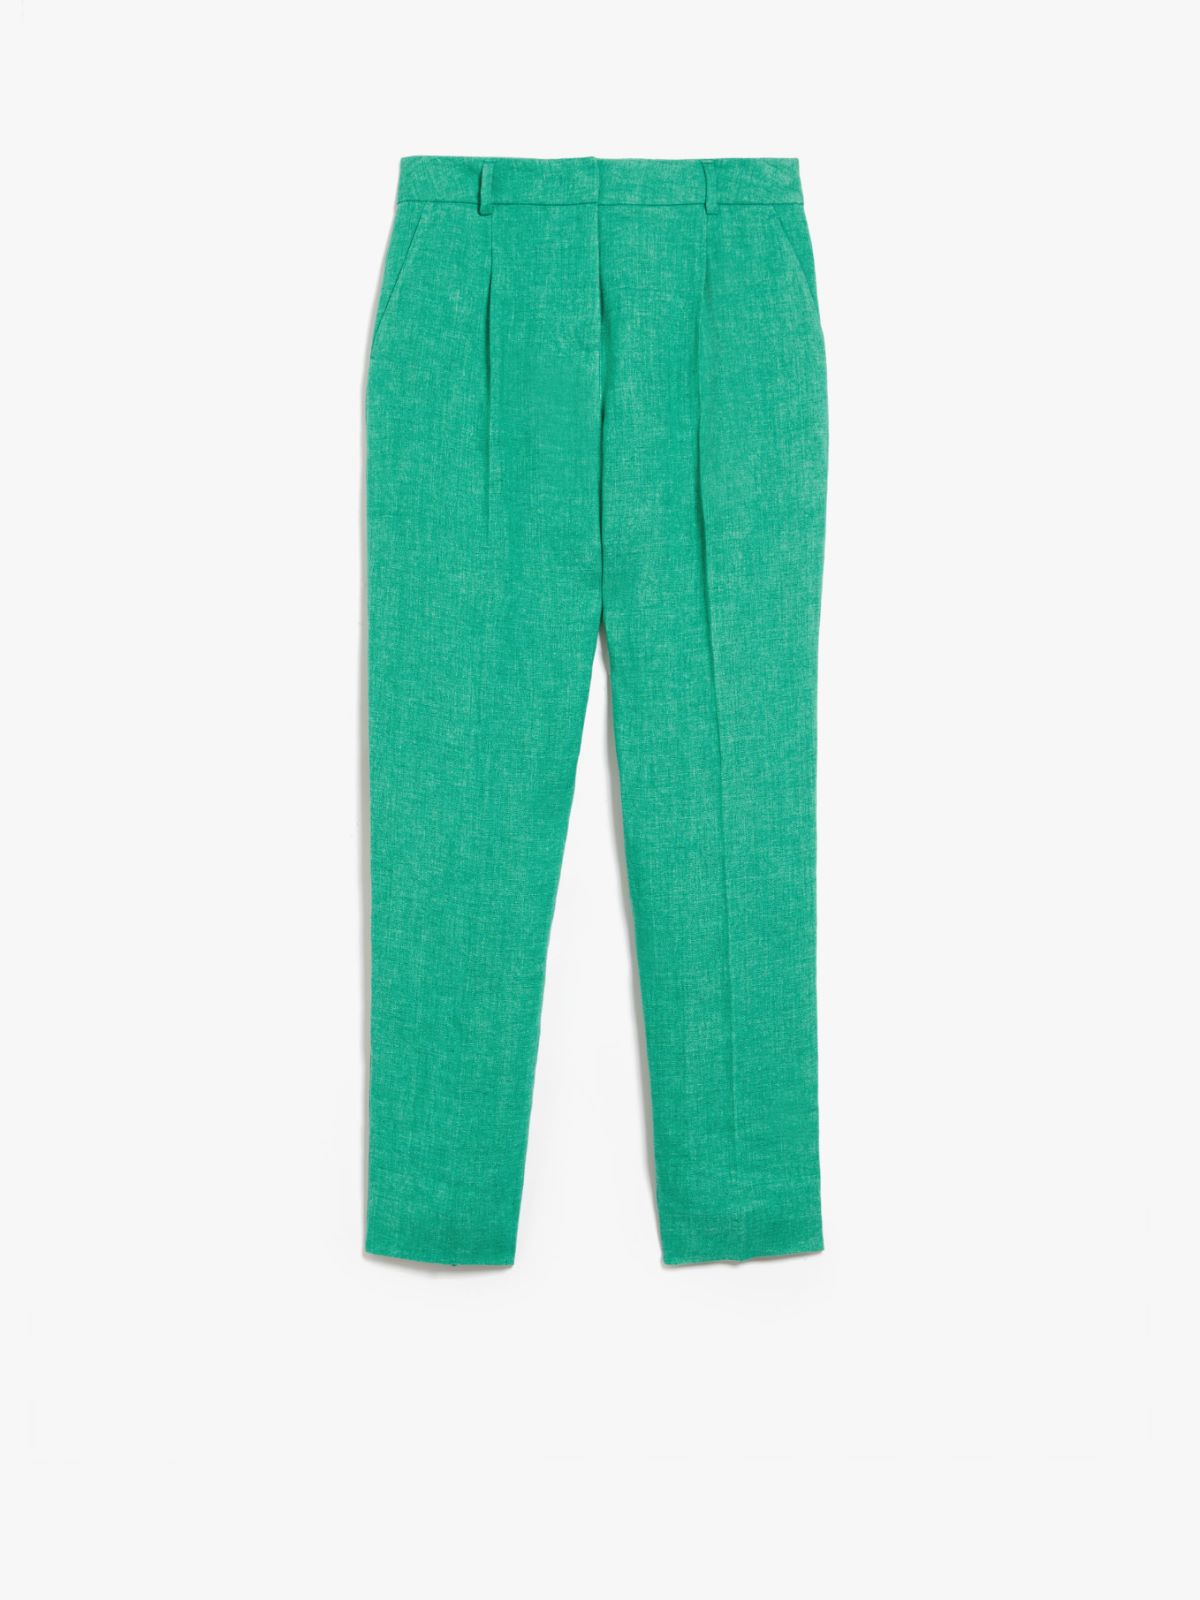 Trousers in linen canvas - GREEN - Weekend Max Mara - 5